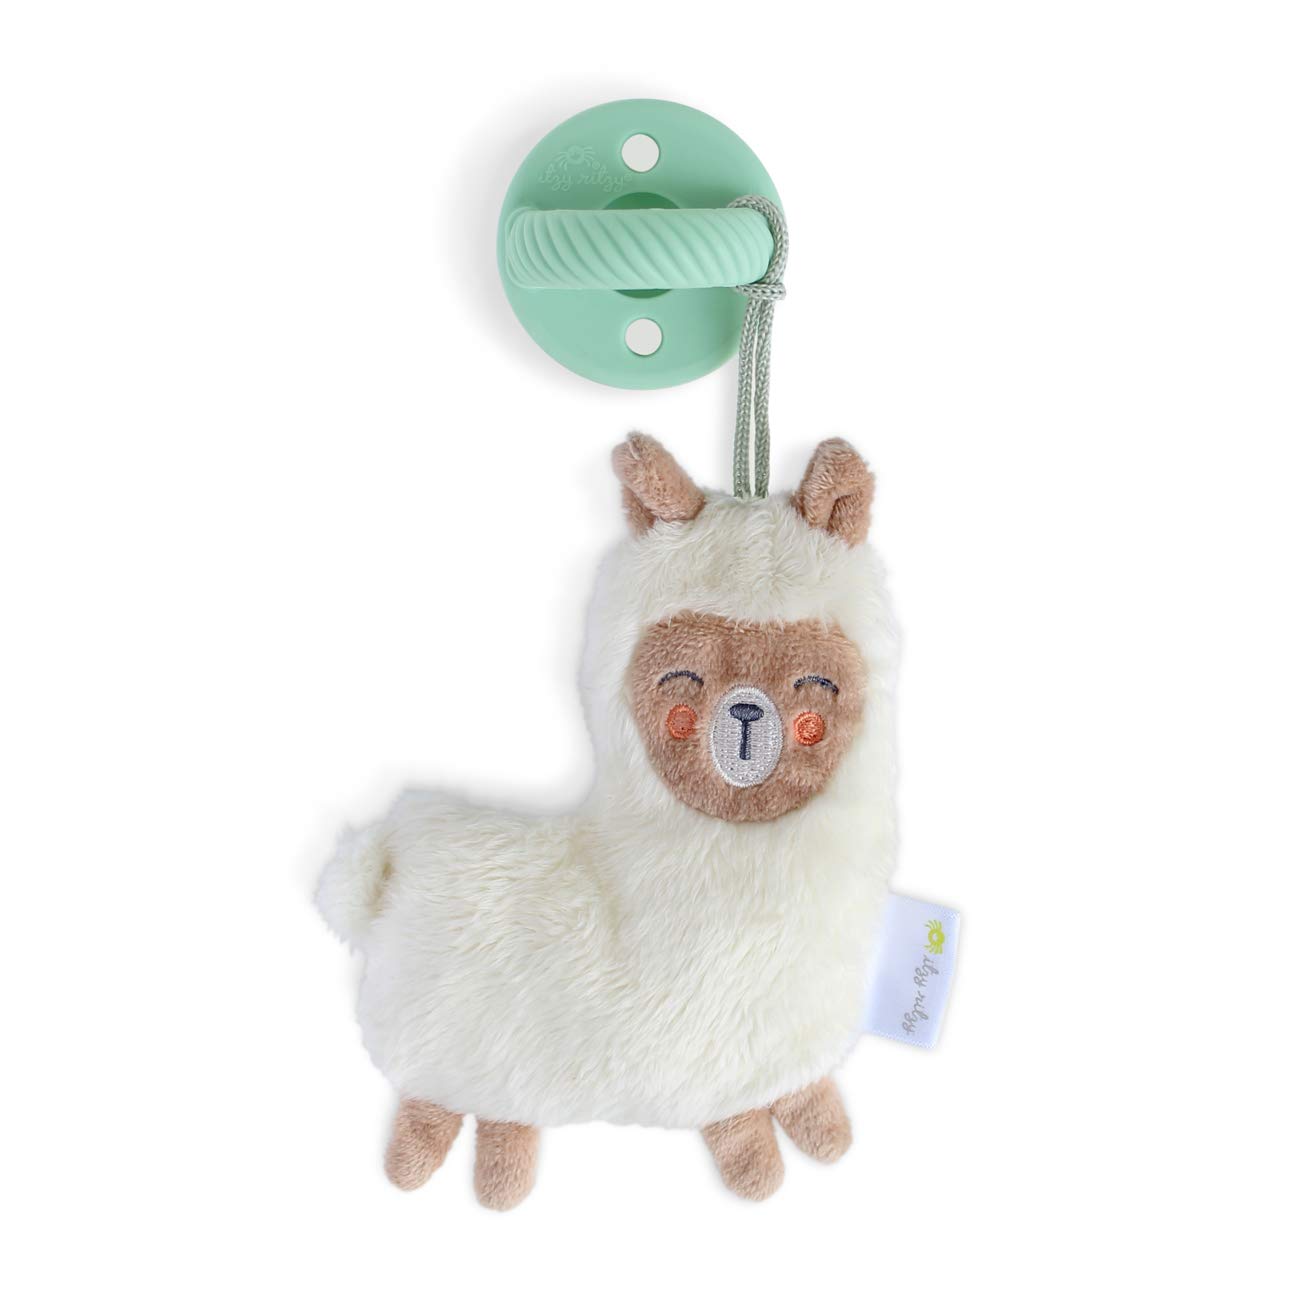 Itzy Ritzy Pacifier & Lovey Set; Detachable Plush Llama & Coordinating Mint Silicone Pacifier; Ideal for Ages 0 Months & Up, Llama